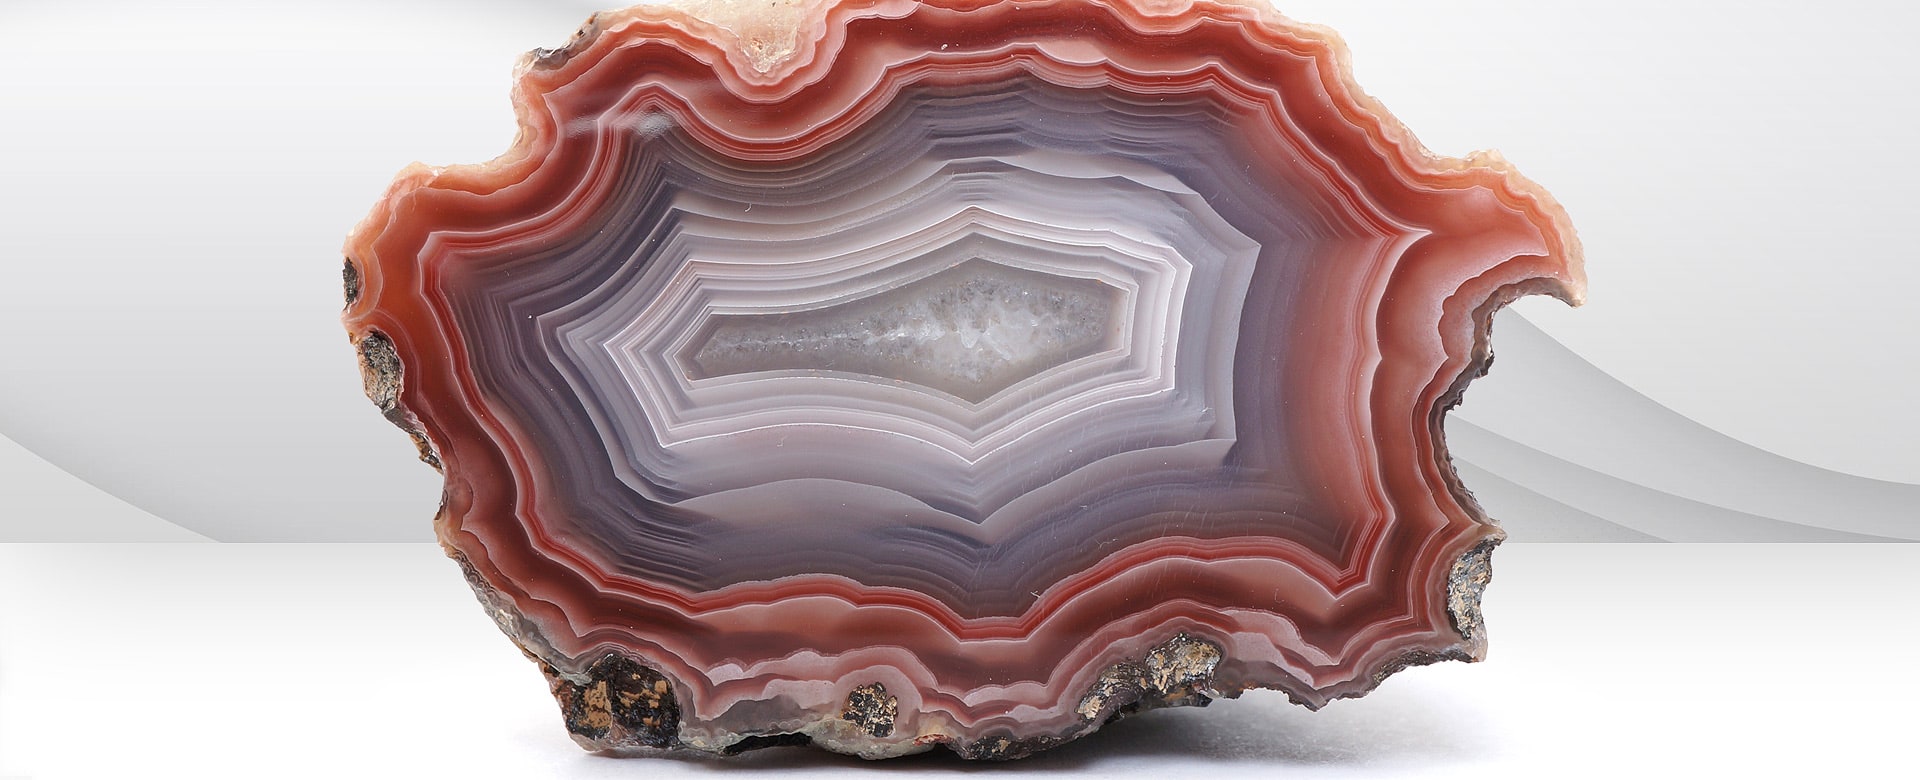 Botswana Agate Meaning and Properties 1